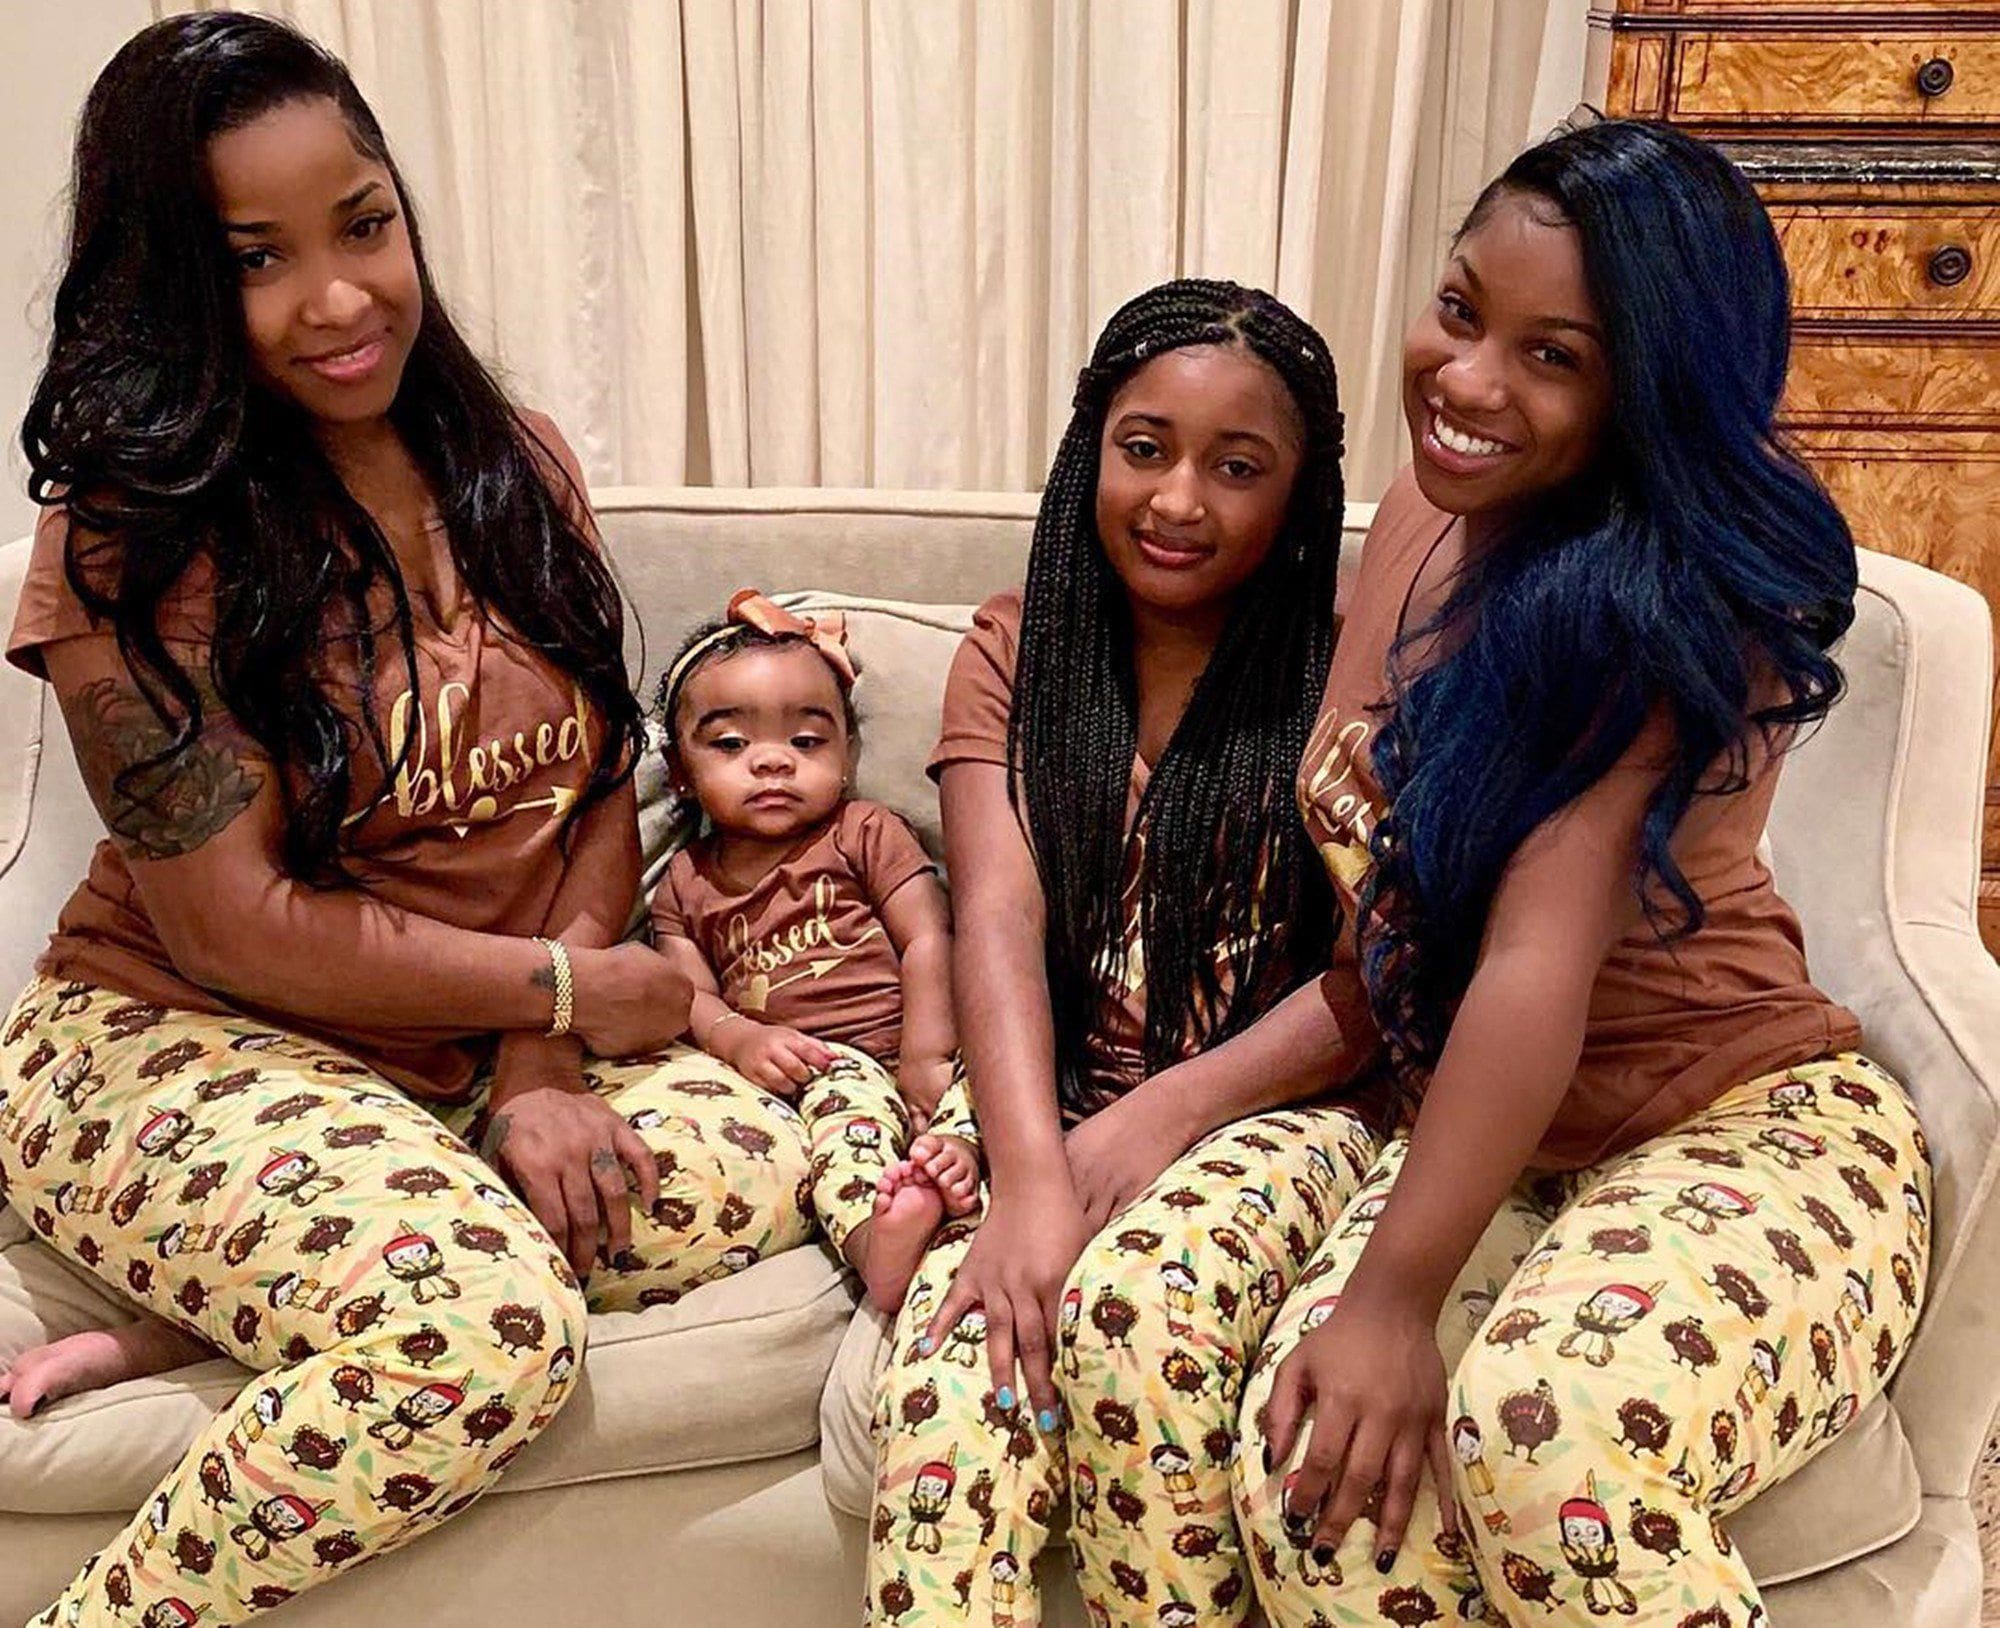 Toya Johnson's Fans Are Going Crazy Over This Photoshoot That Her Niece, Jashae, Has With Baby Girl, Reign Rushing - See The Clips